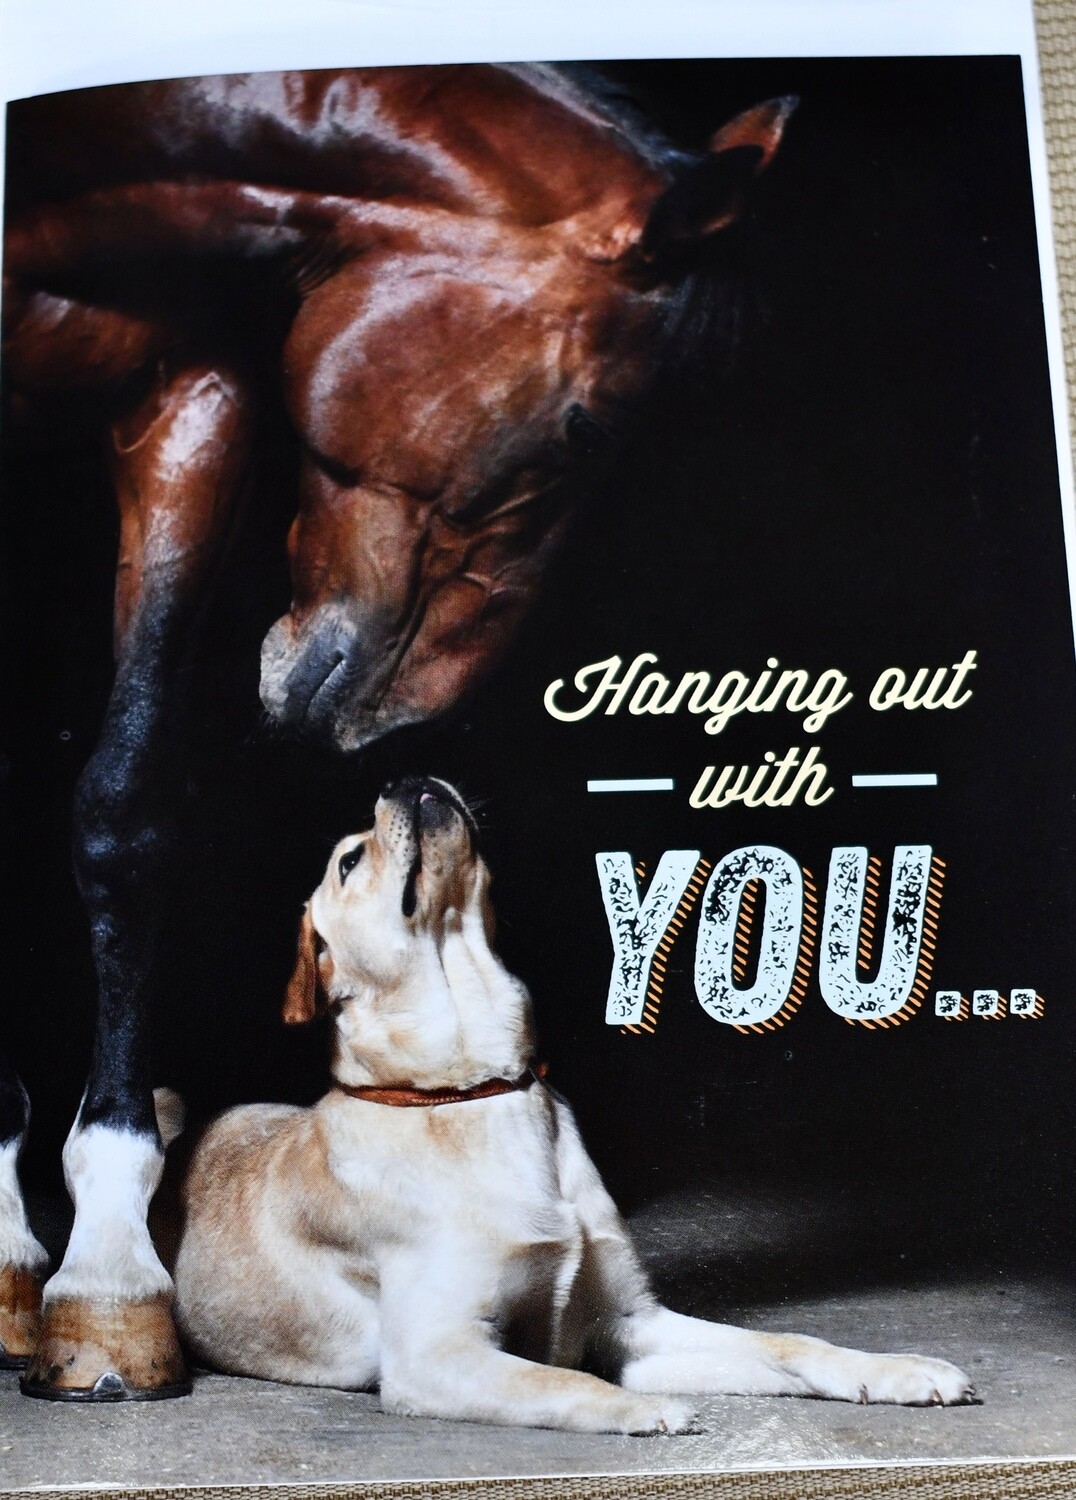 "Hanging out with you" Card